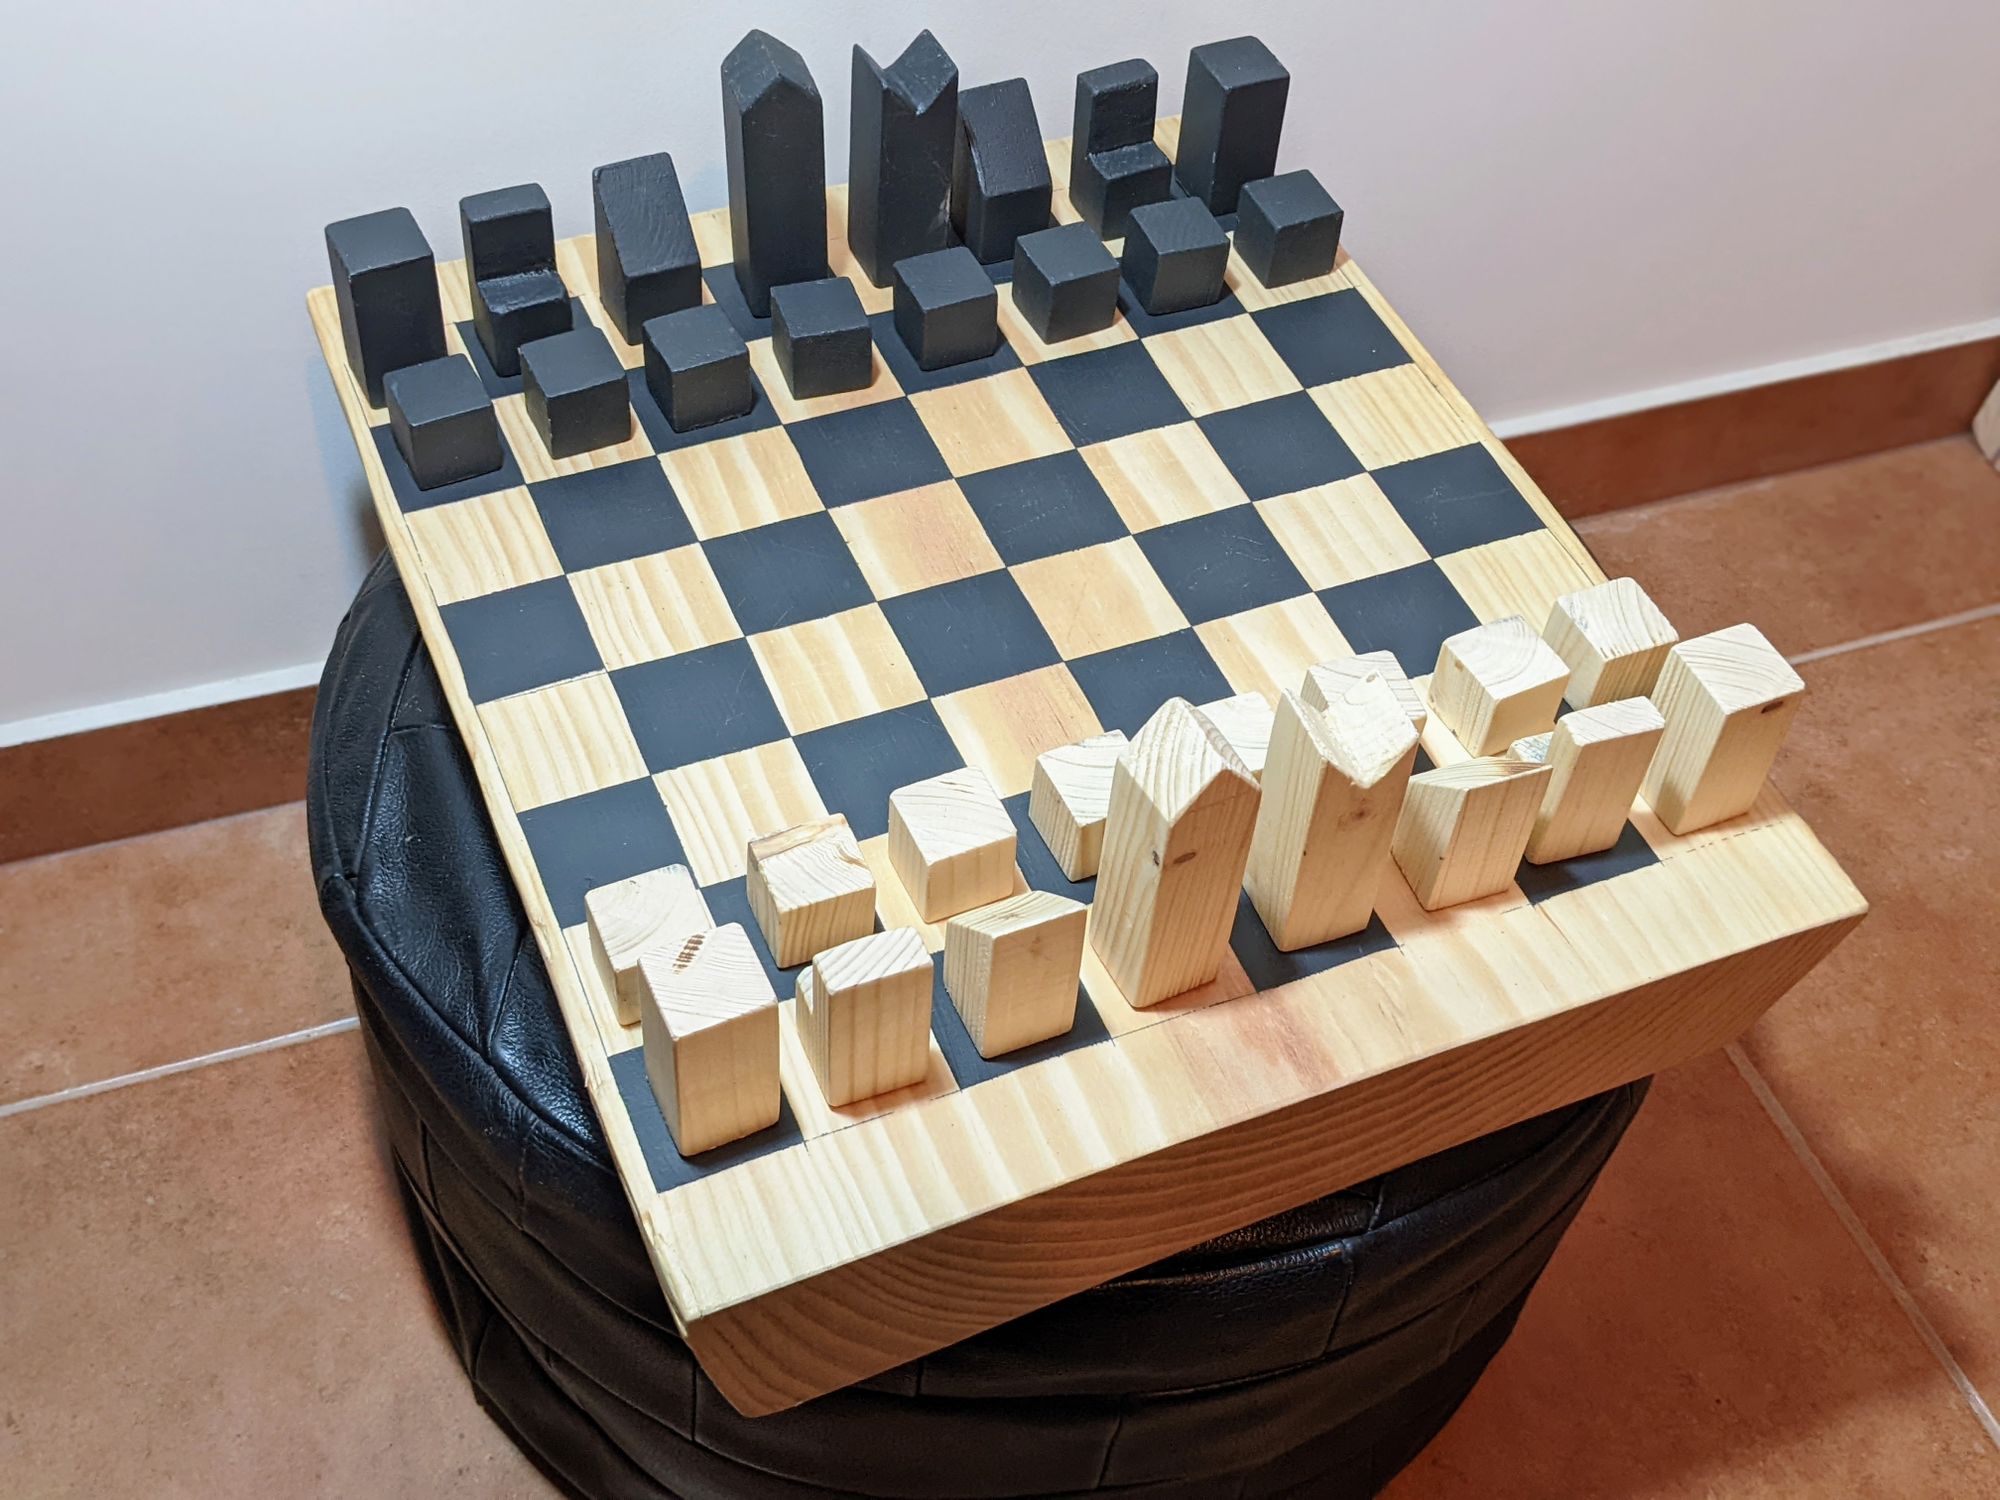 The joy of crafting imperfect things: chess set